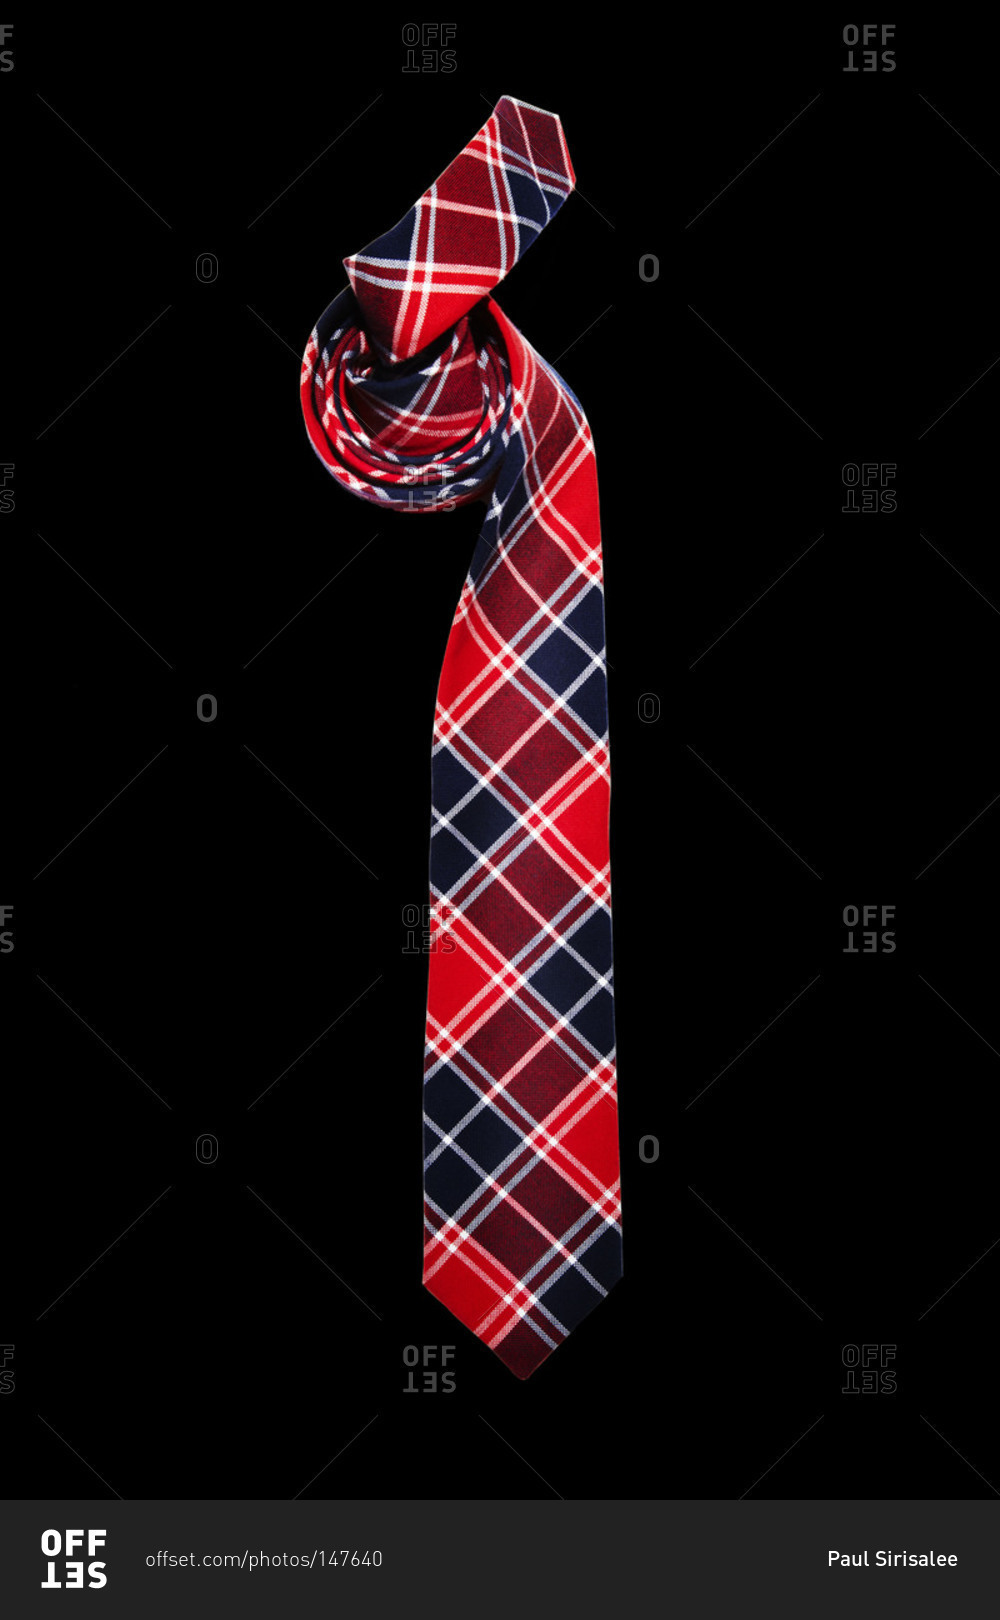 Red and blue plaid tie on black background